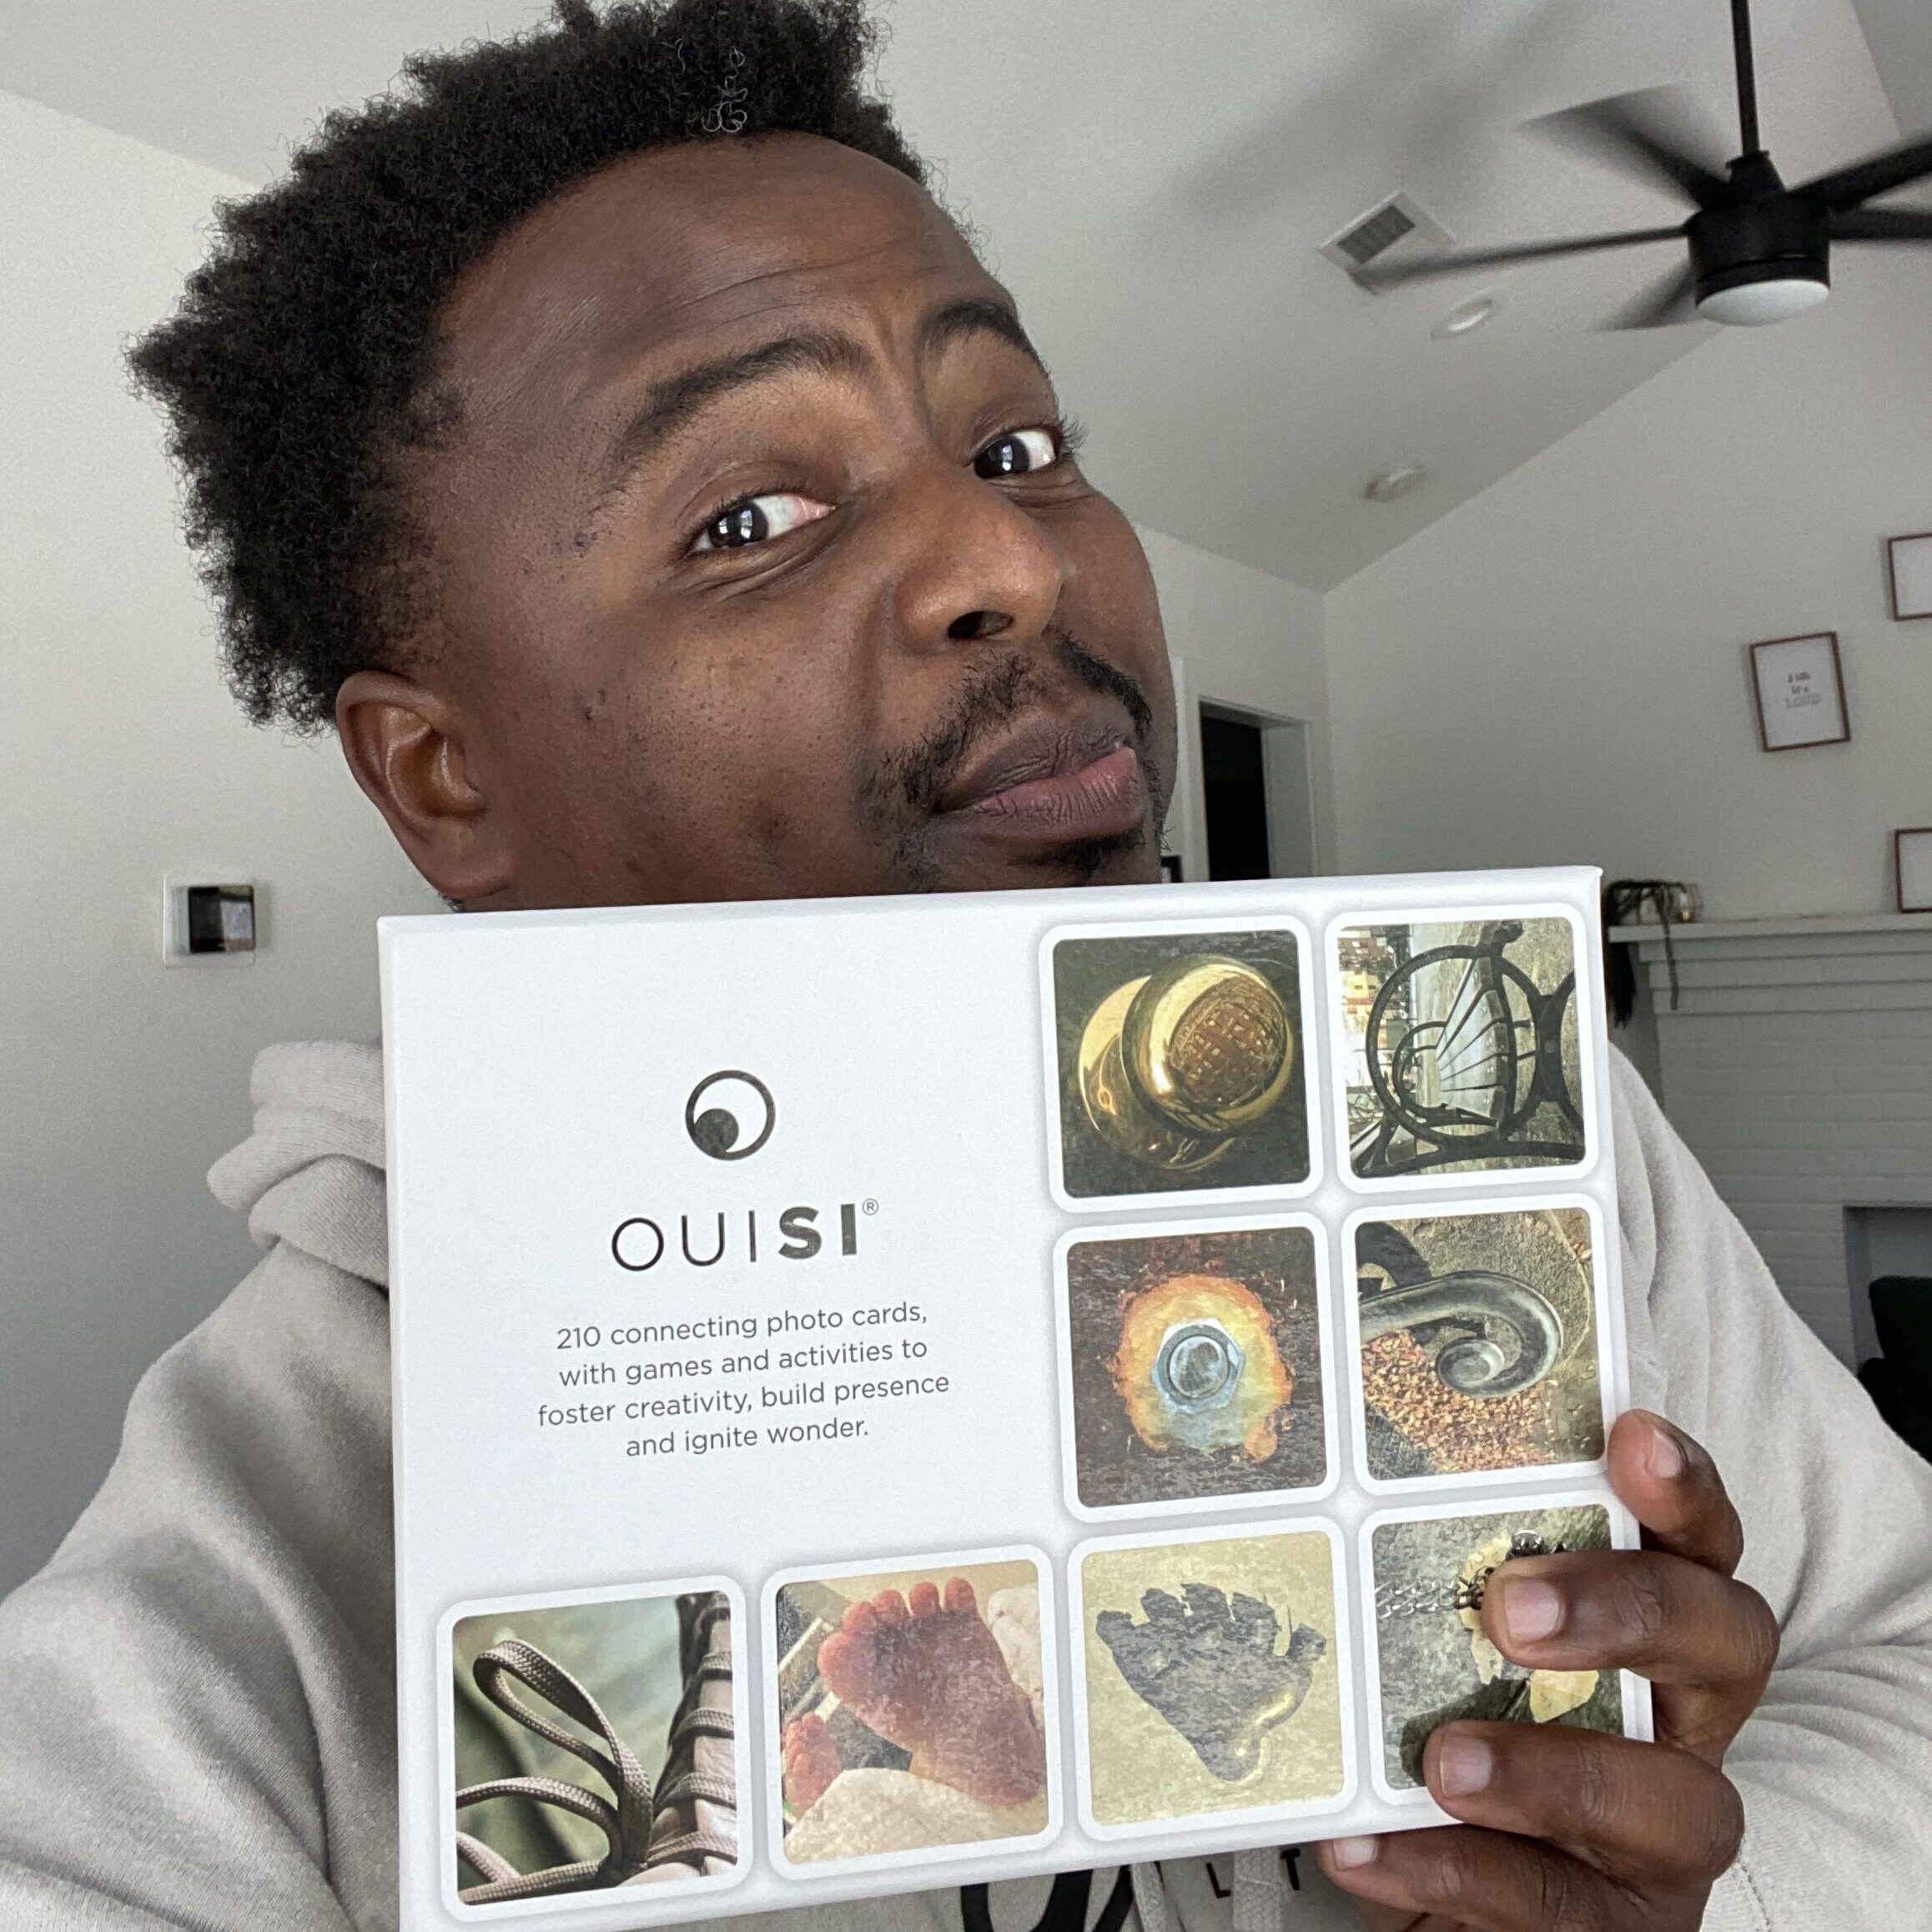 The Ultimate Family Time Hack: Why OuiSi Is The Most Fun Game